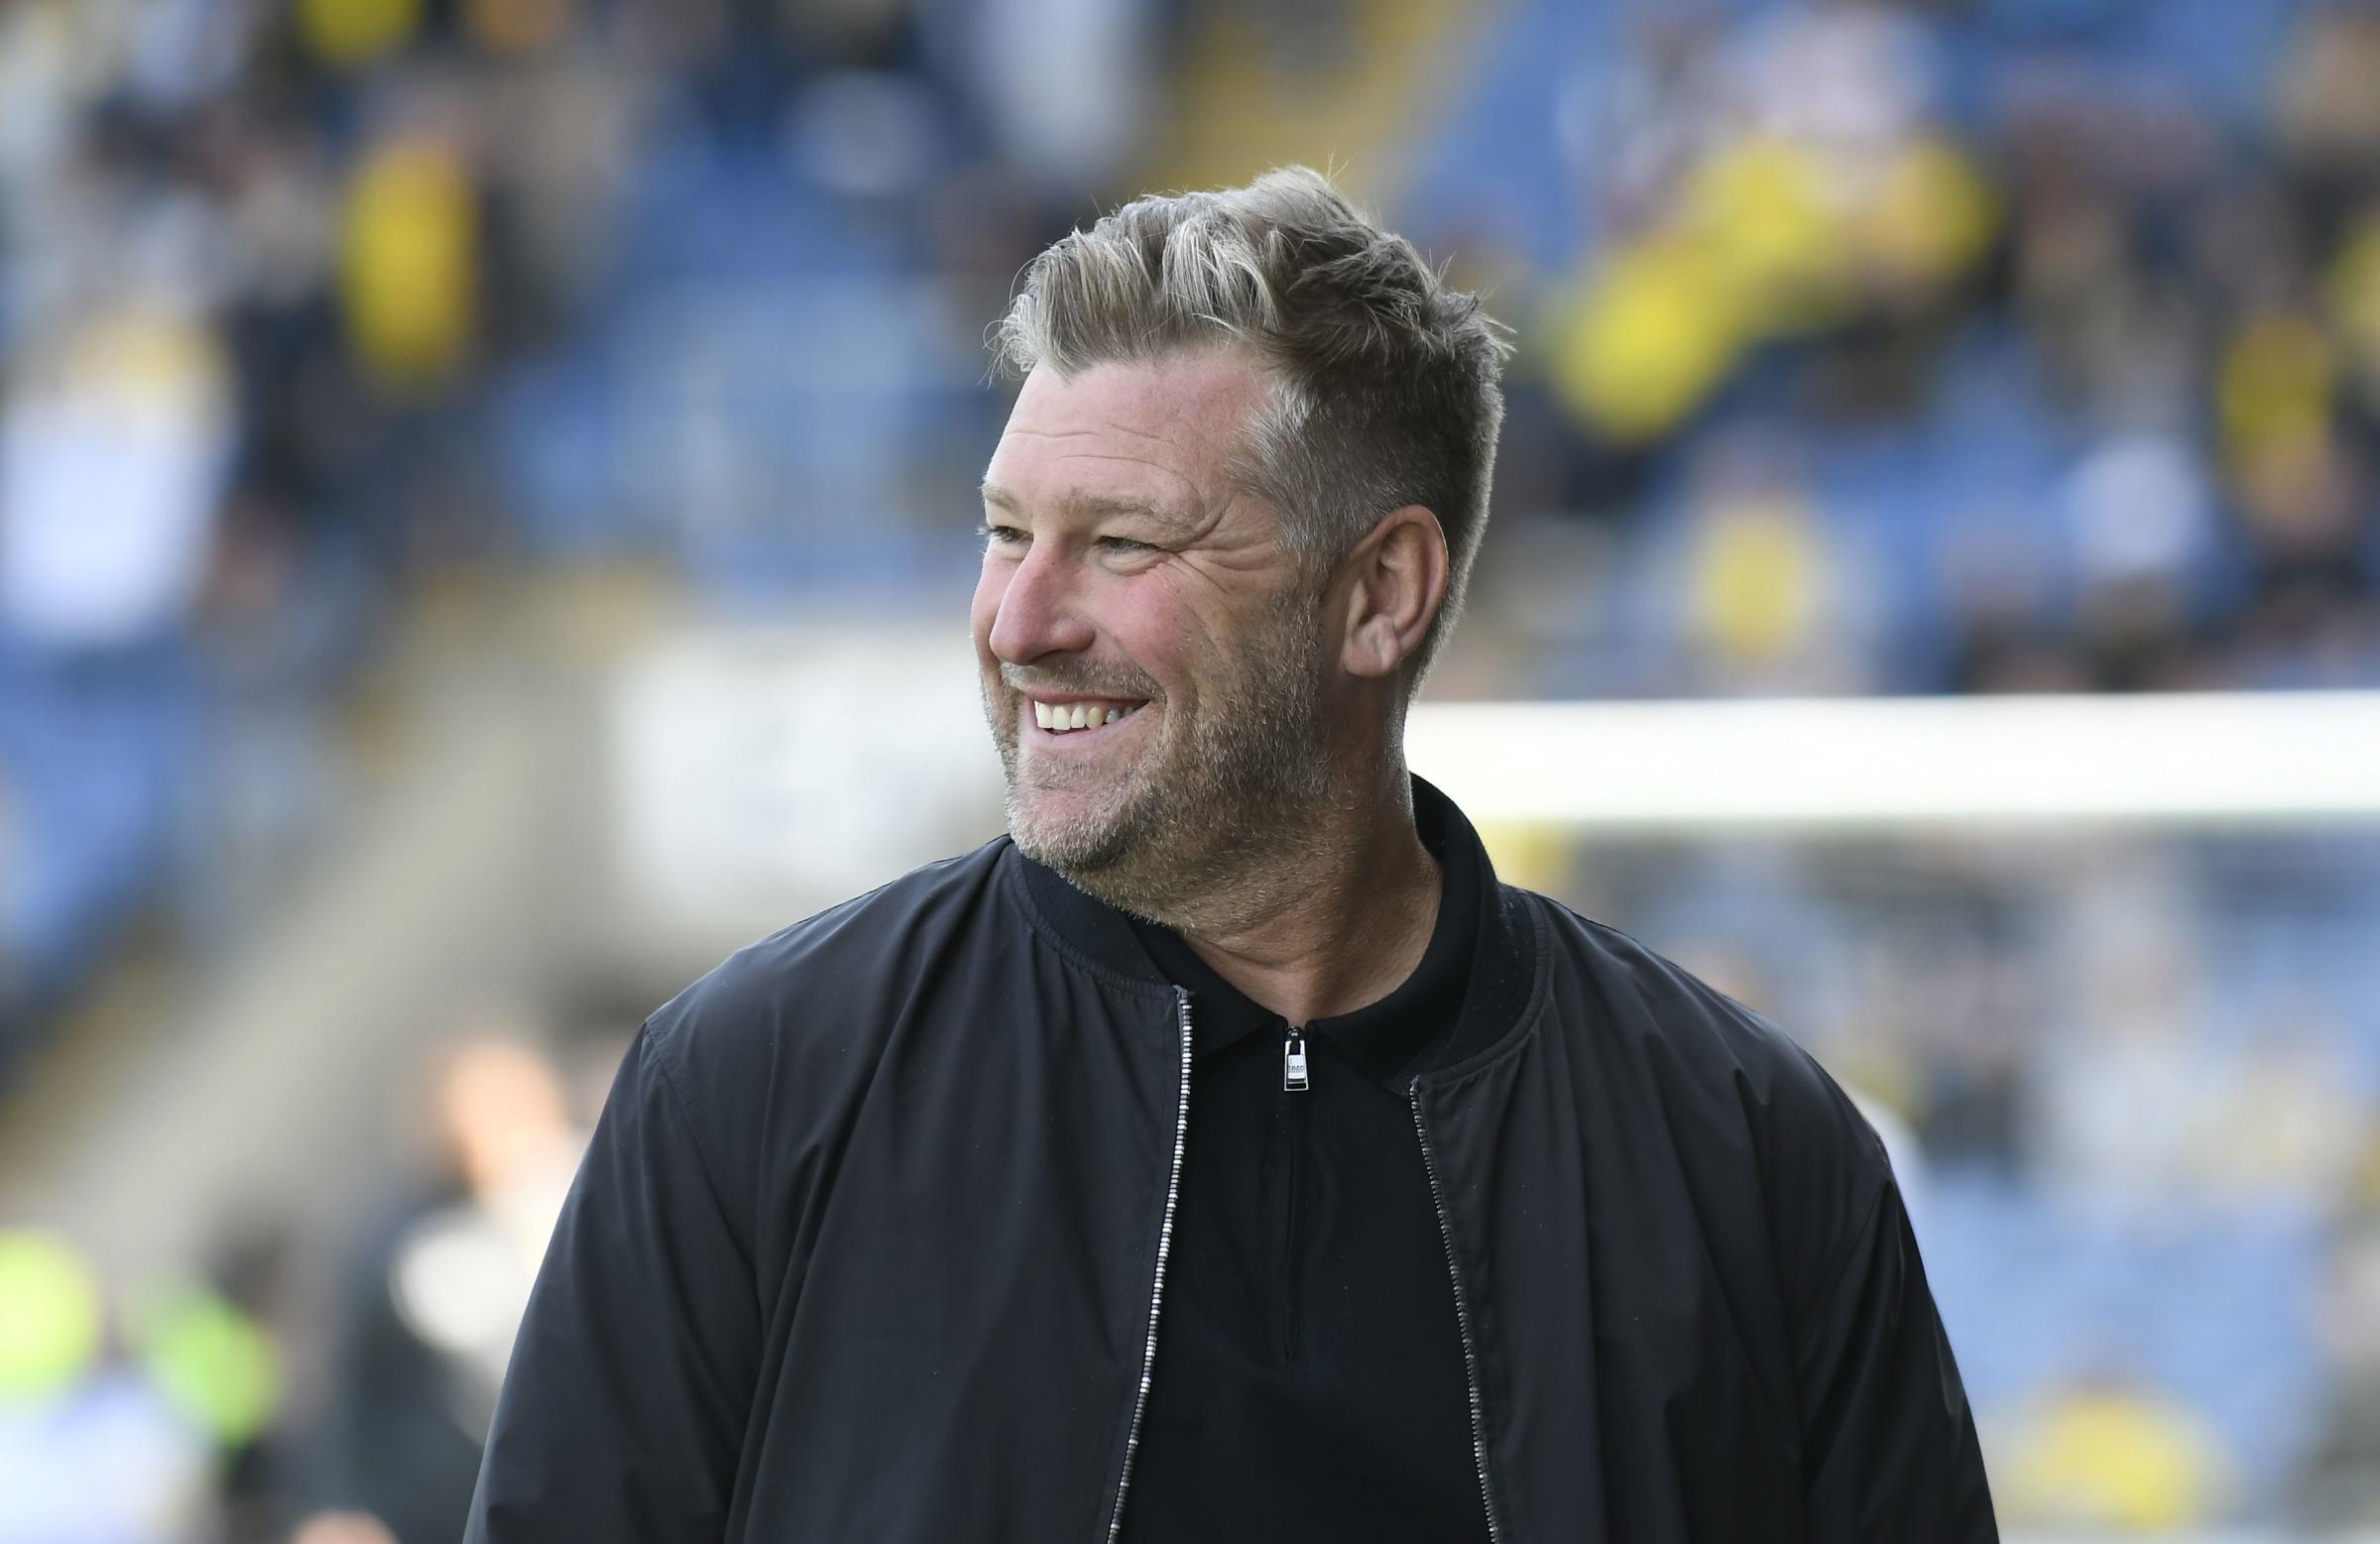 Oxford United’s Karl Robinson thrilled by Liverpool and Man City